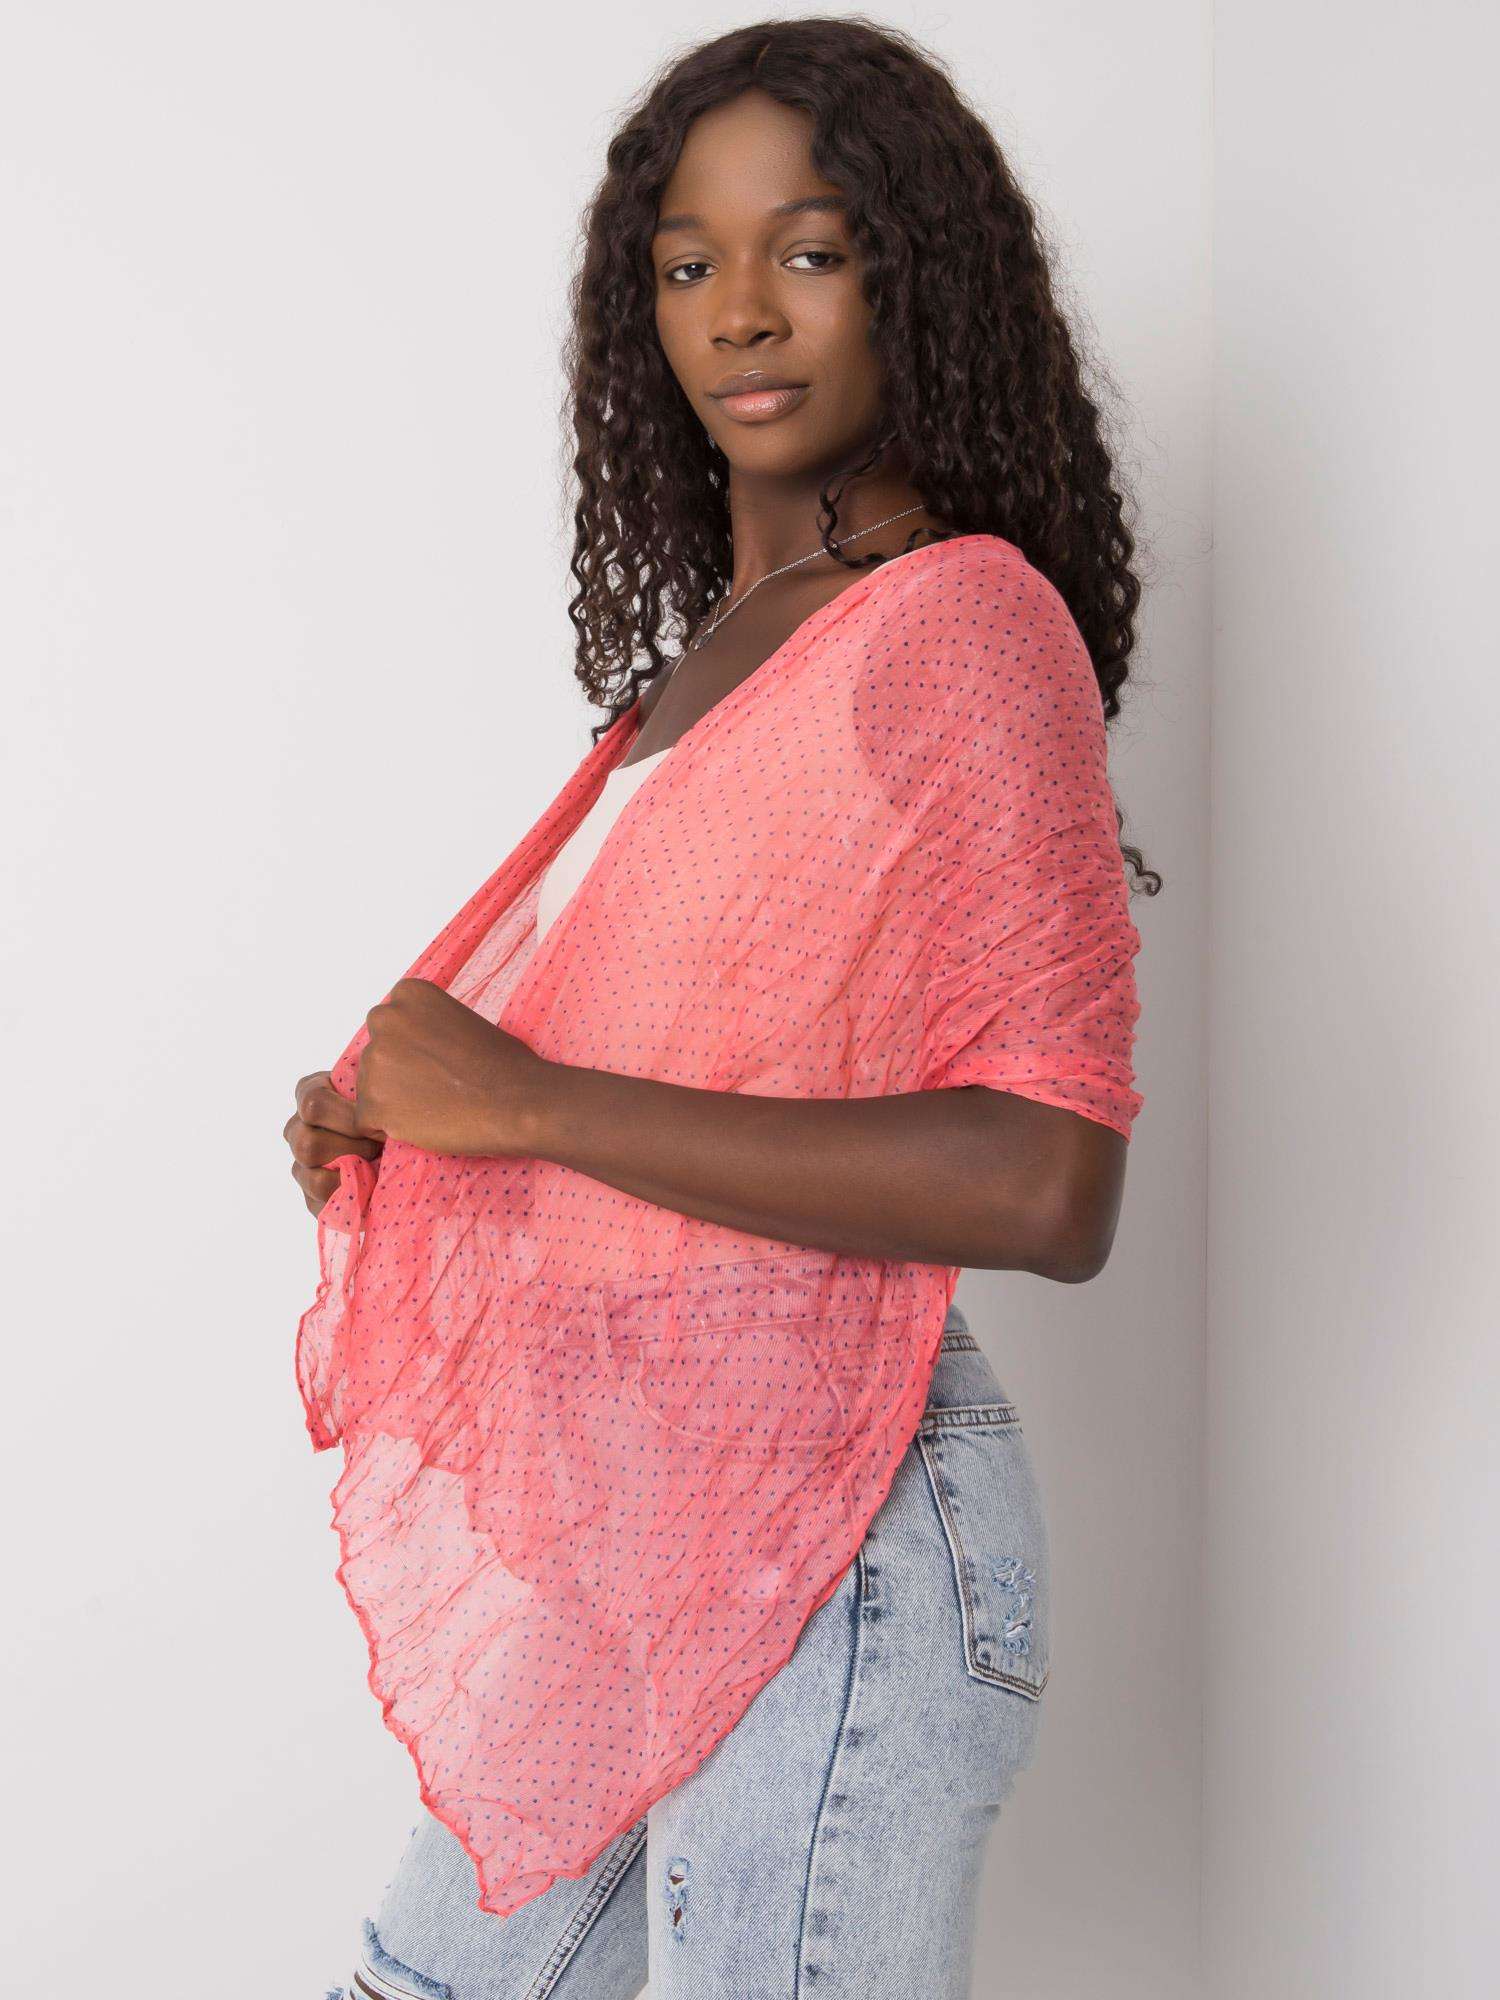 Women's coral and dark blue scarf in polka dots